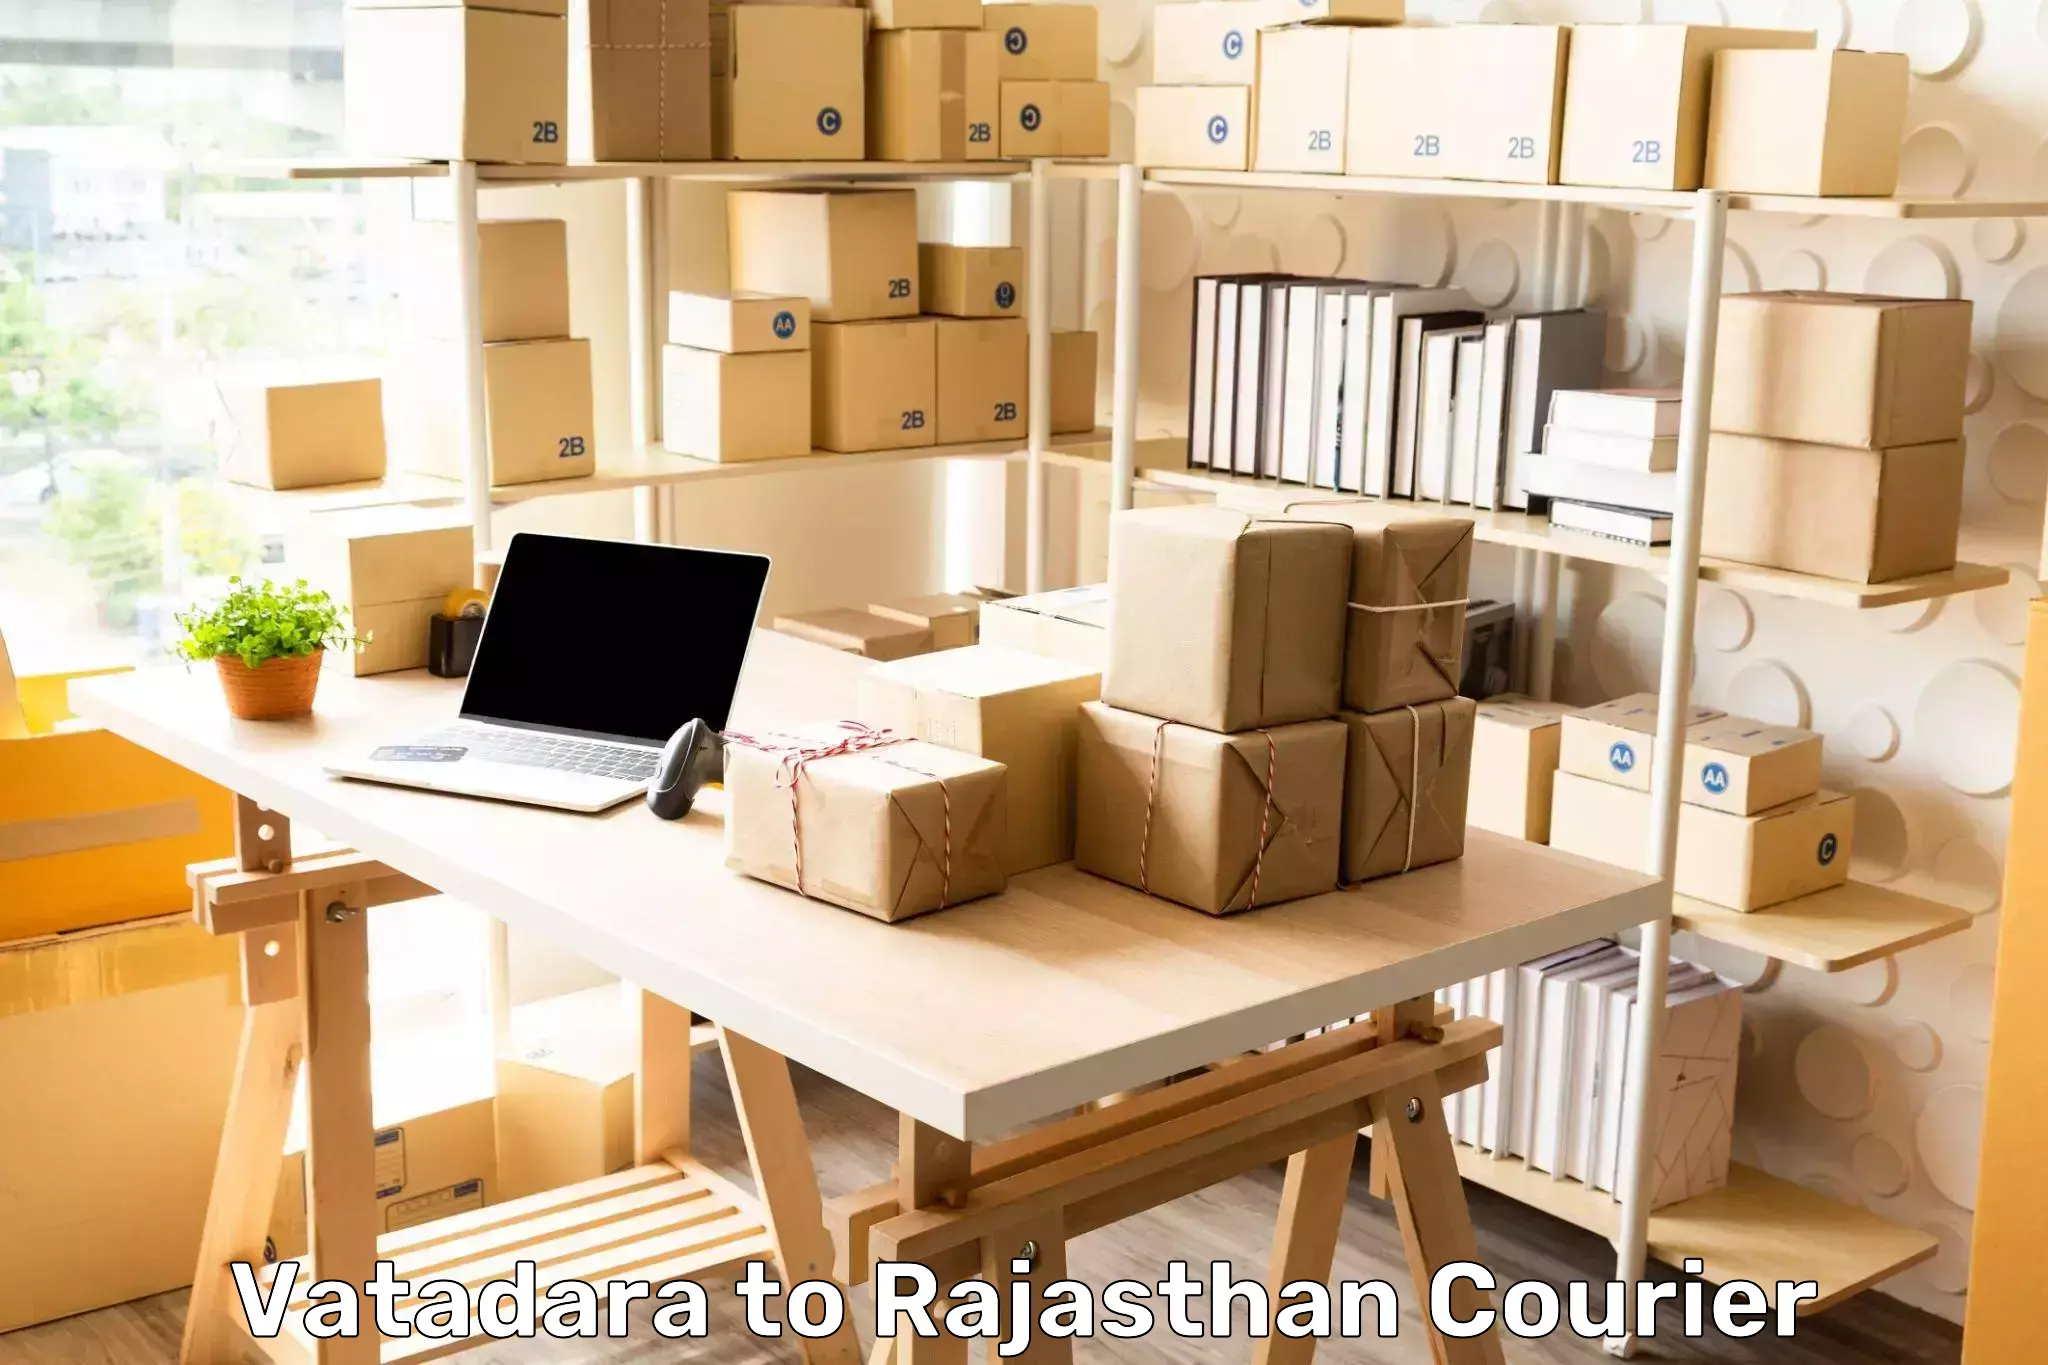 Sustainable courier practices Vatadara to Yeswanthapur